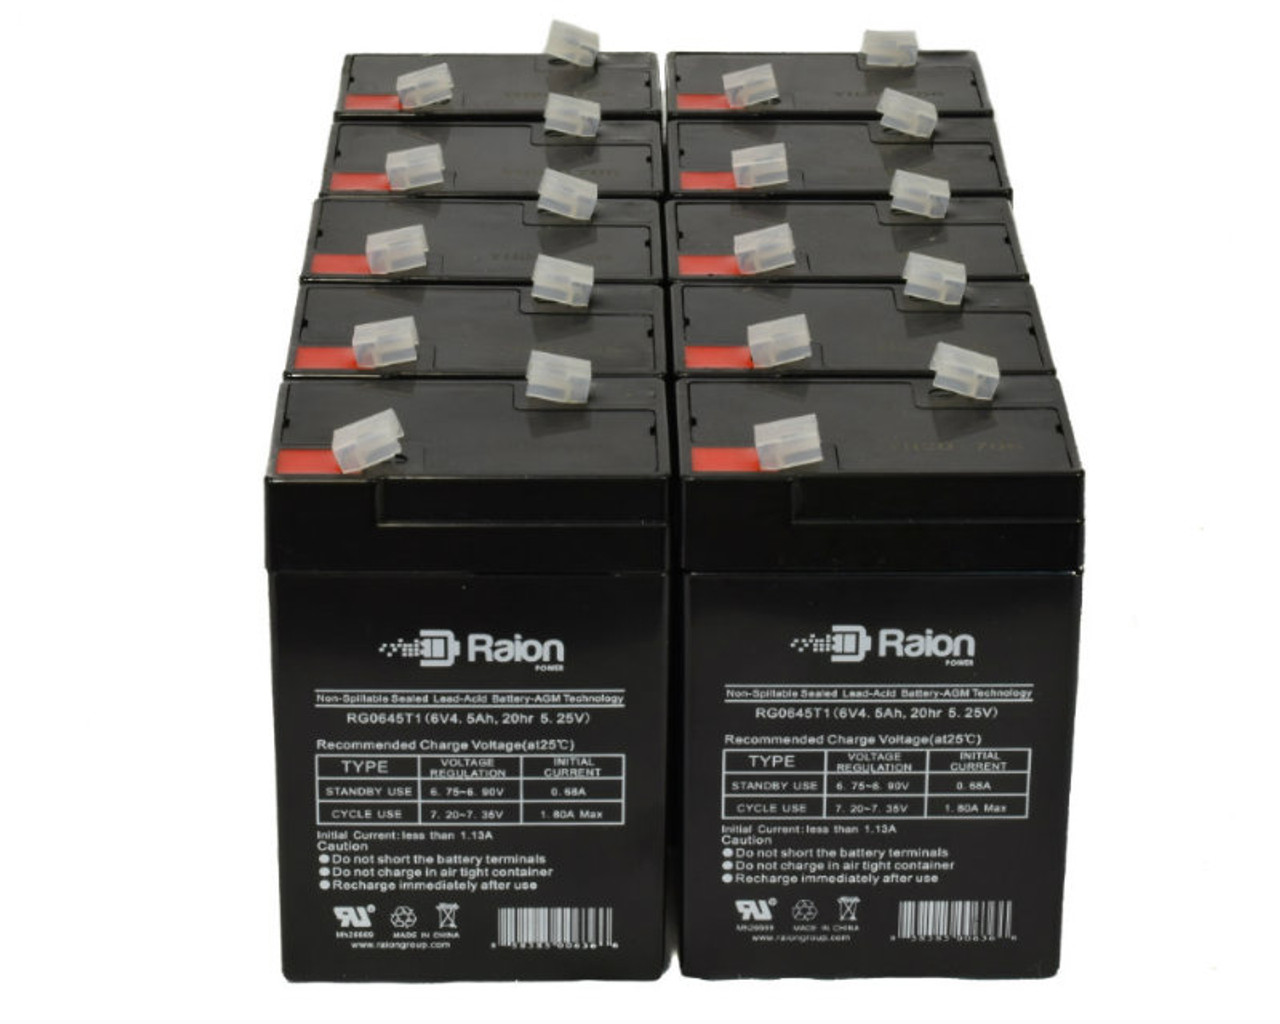 Raion Power 6 Volt 4.5Ah RG0645T1 Replacement Battery for MHB MS5-6B - 10 Pack